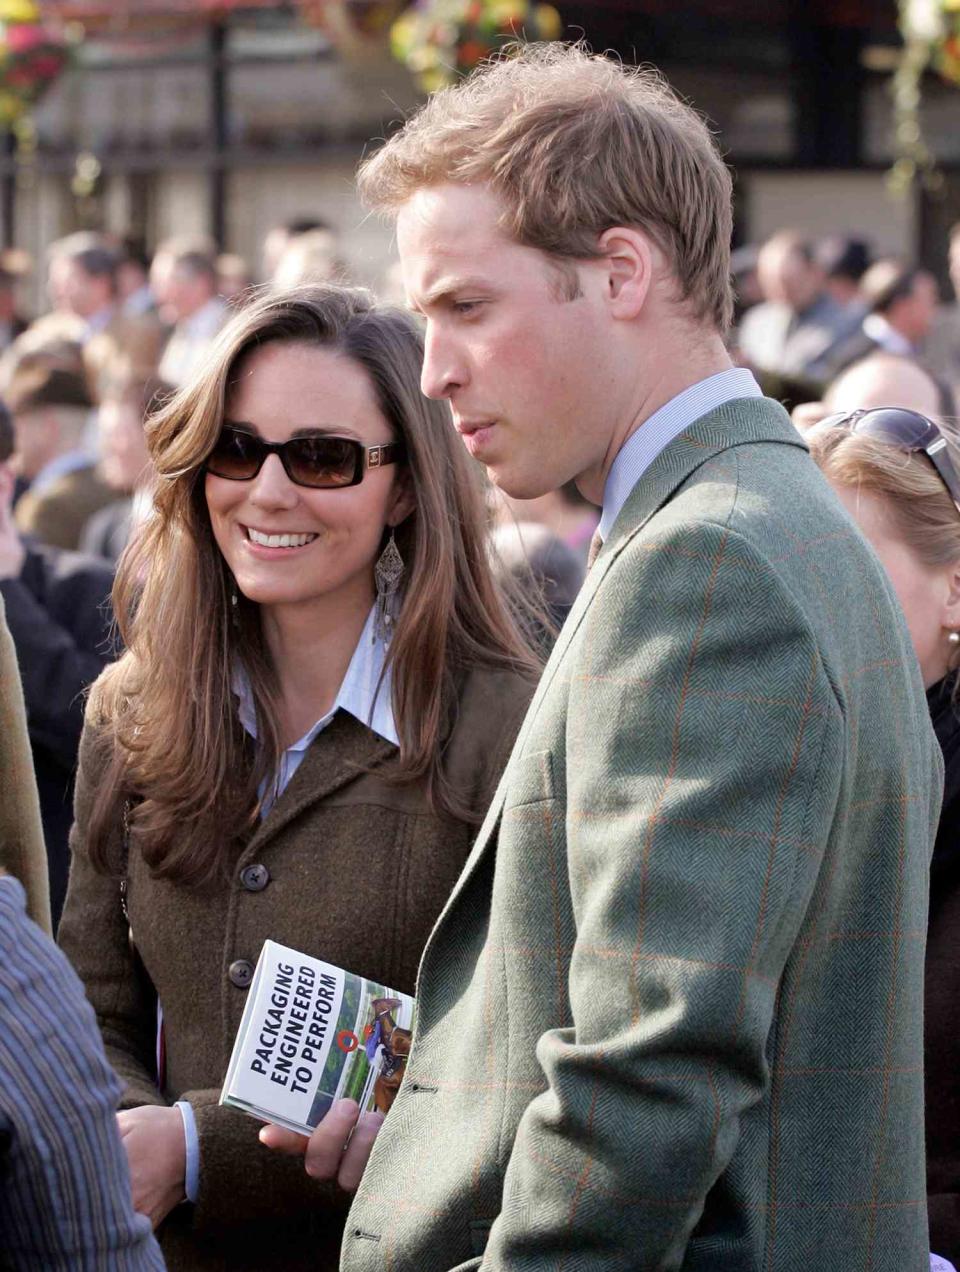 Kate Middleton and Prince William attend day 1 of the Cheltenham Horse Racing Festival on March 13, 2007 in Cheltenham, England